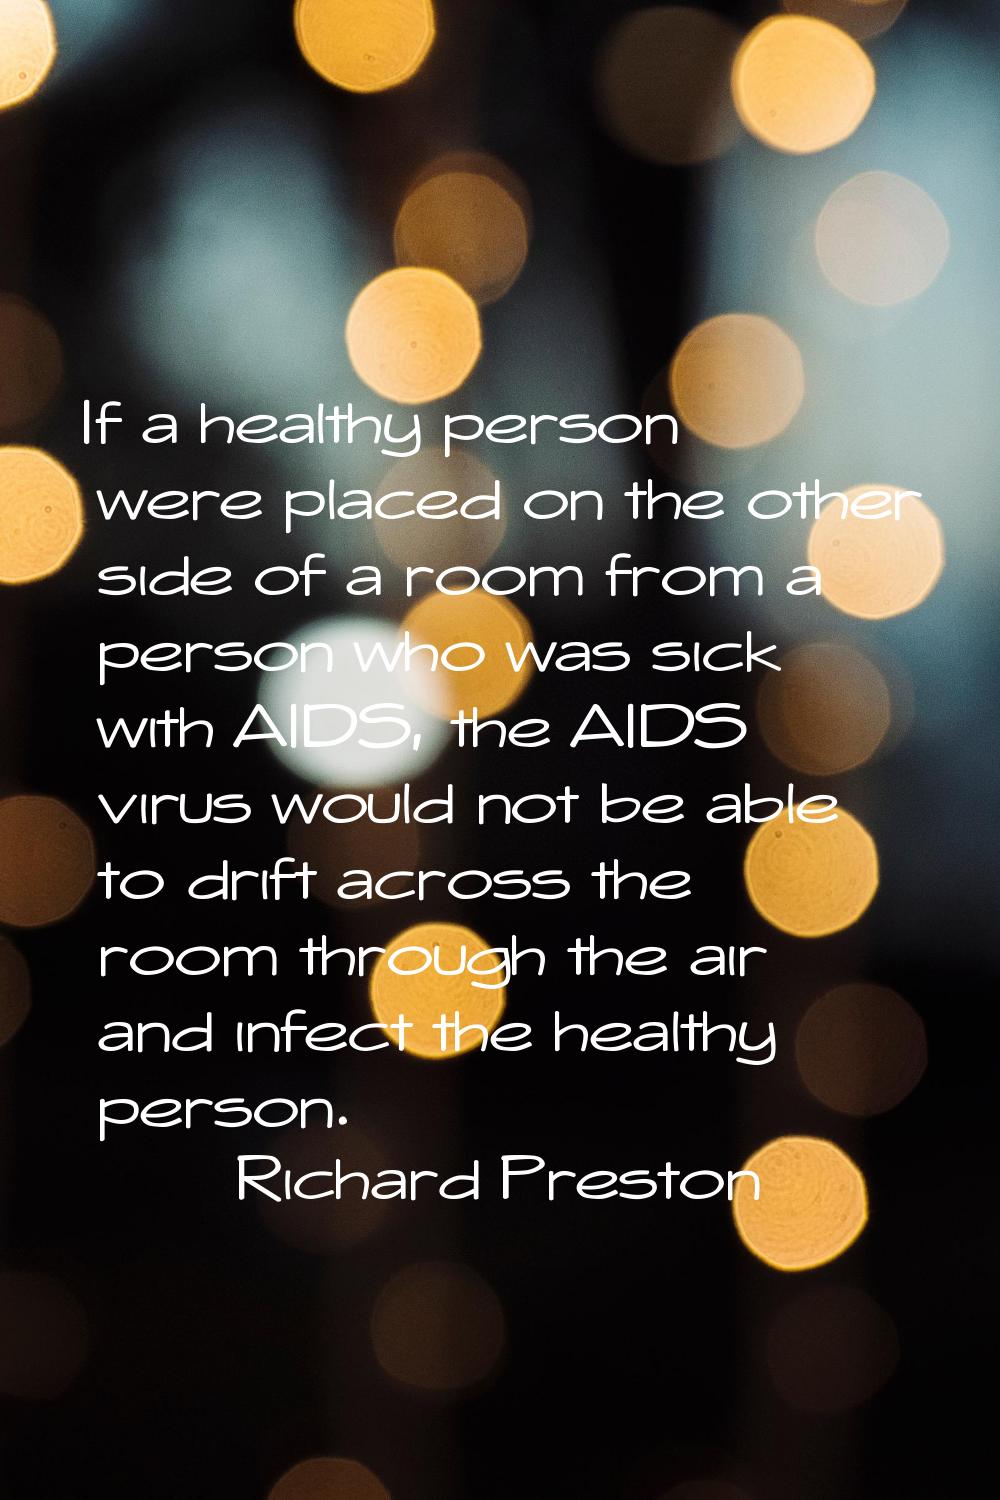 If a healthy person were placed on the other side of a room from a person who was sick with AIDS, t